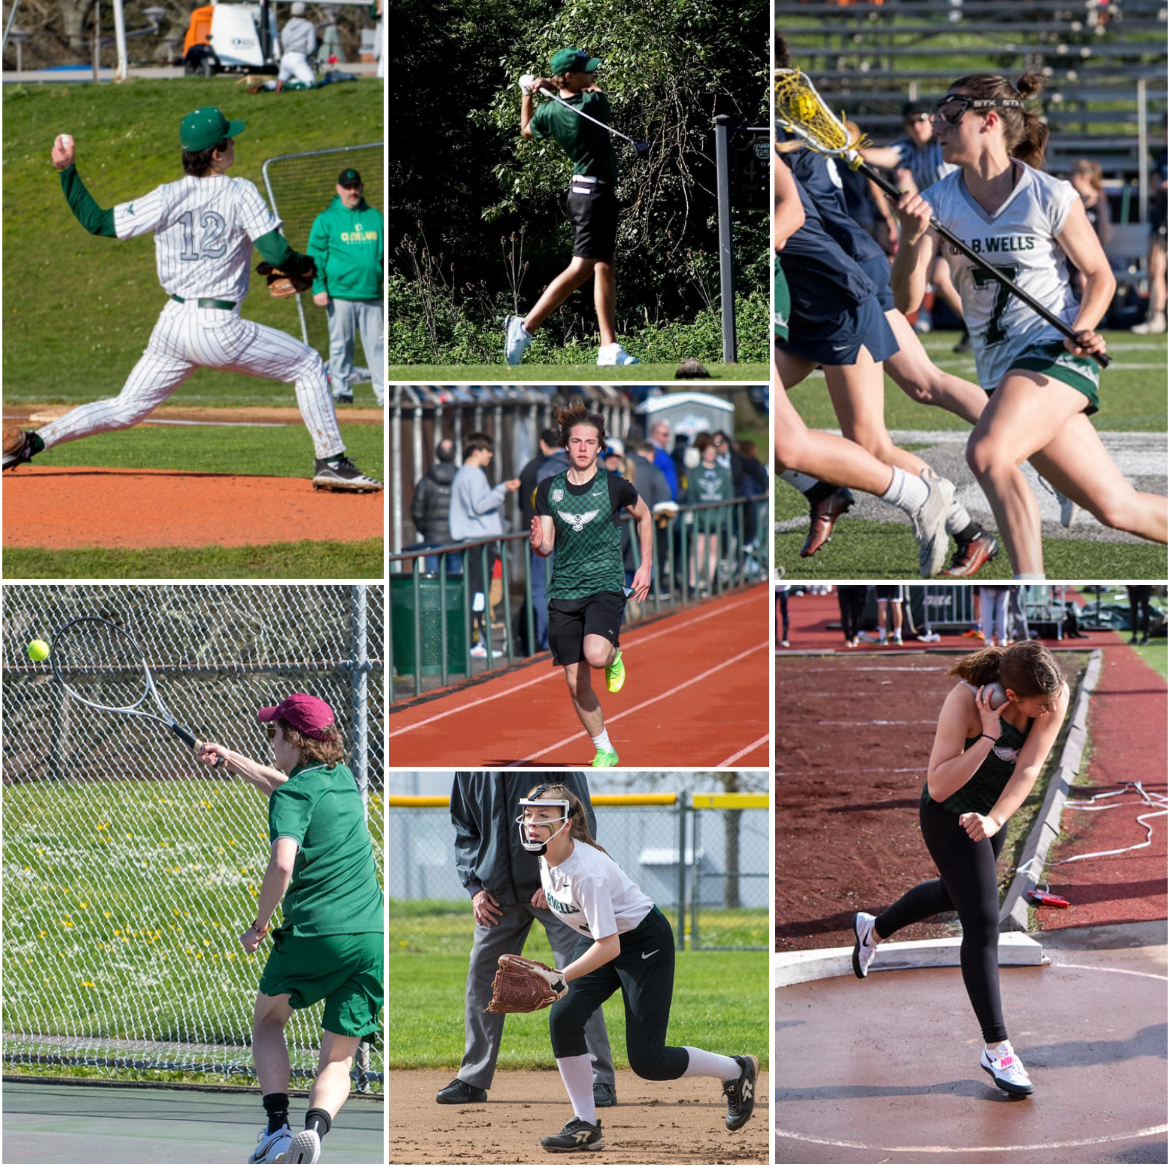 Collage+of+Spring+sports%2C+created+by+Madeline+Wafer+%2C+photos+from+IBW+Flickr